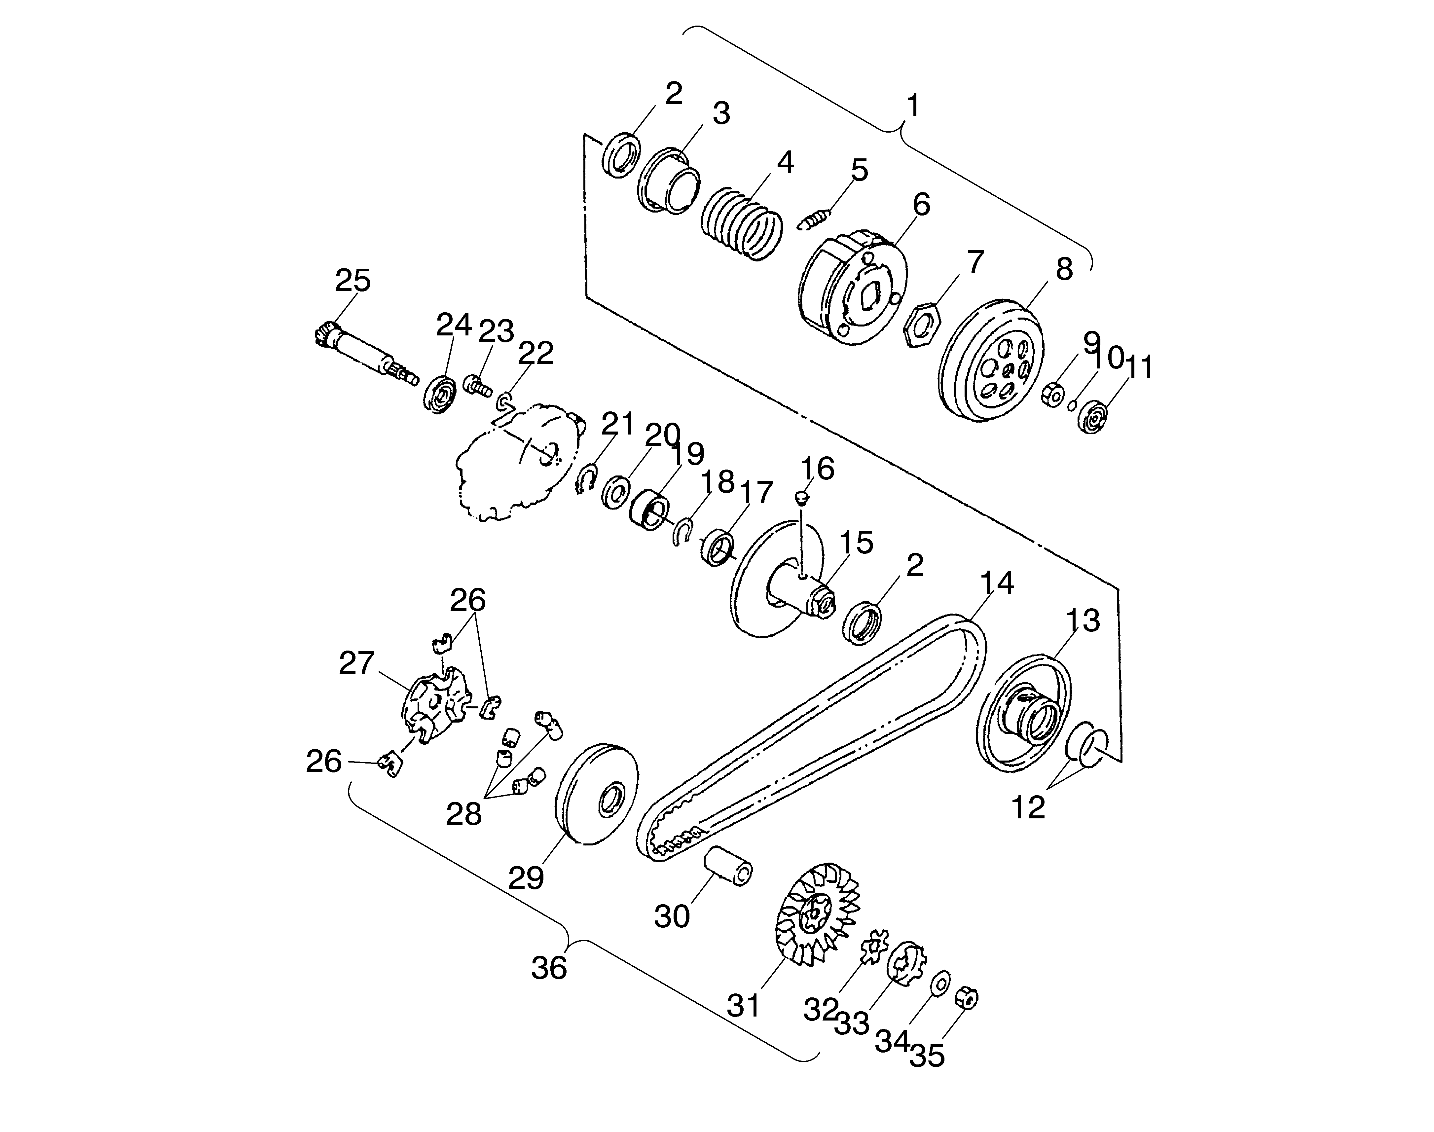 Part Number : 0450041 WASHER-PLAIN(10)